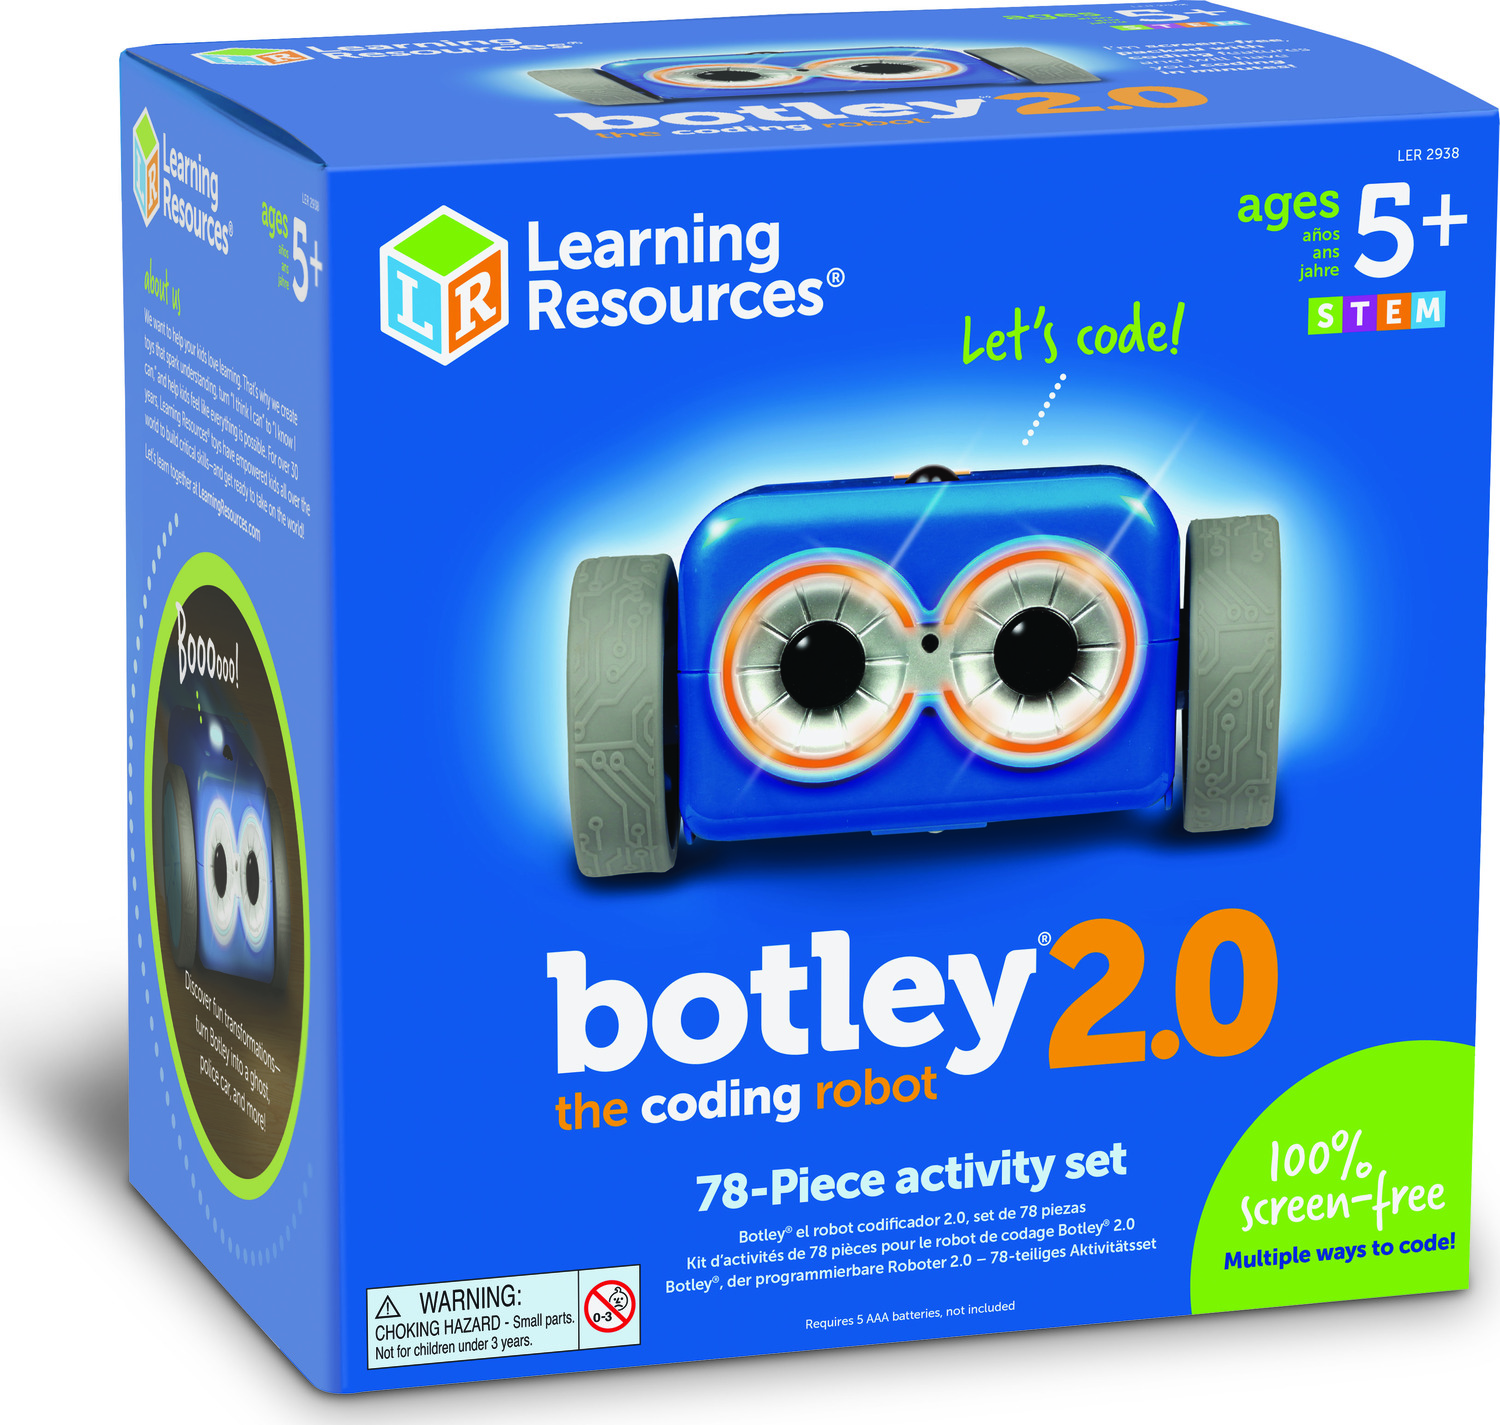 Botley 2.0 The Coding Robot Activity Set - Teaching Toys and Books